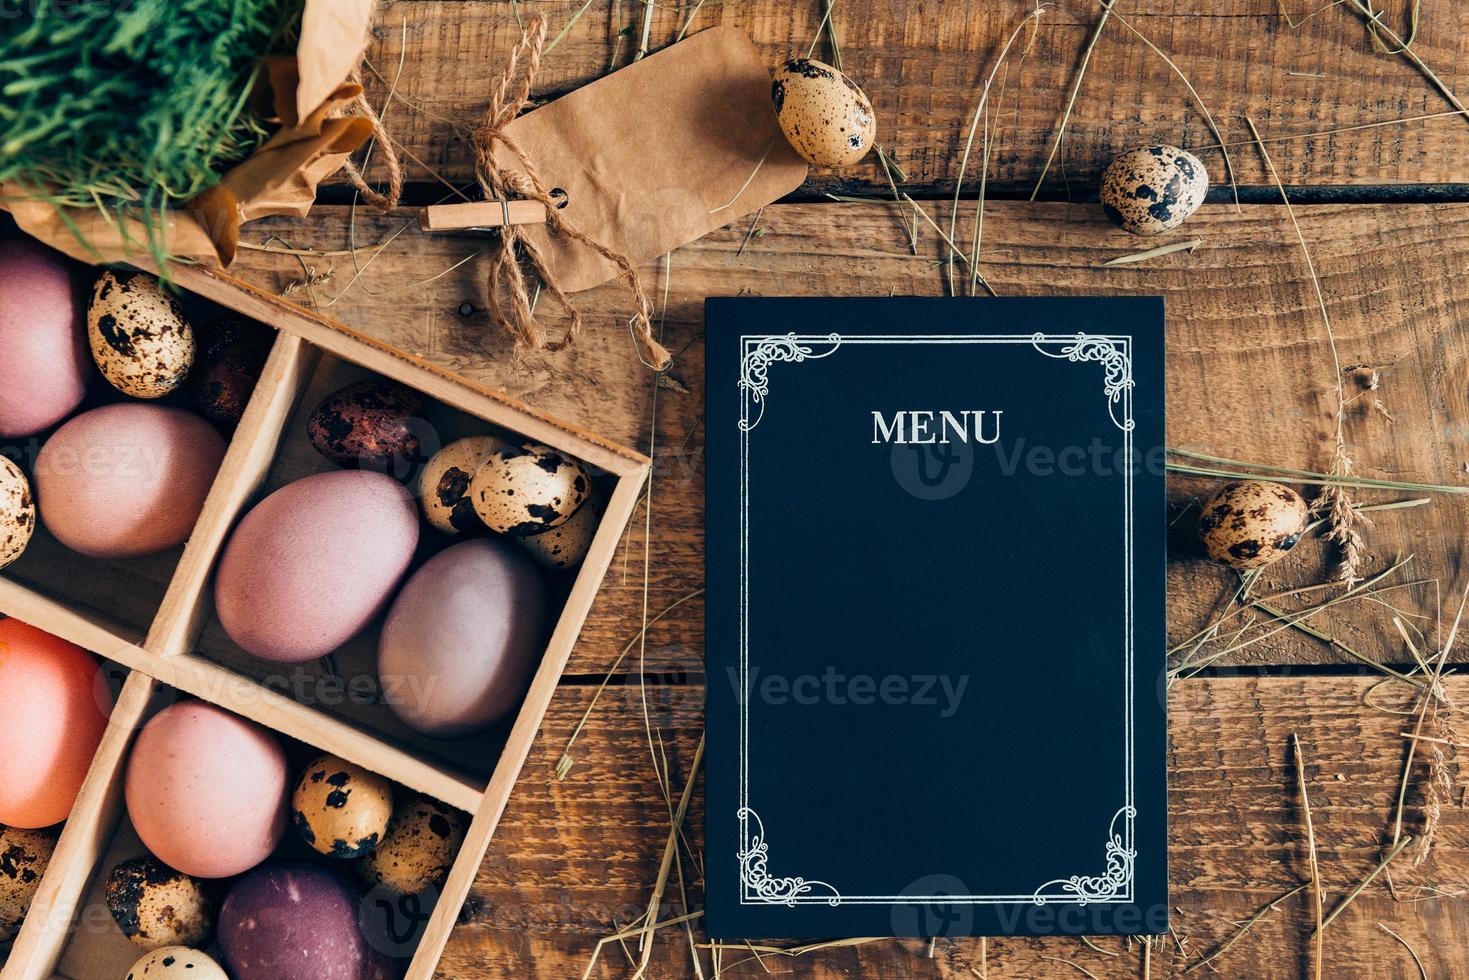 Easter menu. Top view of Easter eggs in wooden box and menu board lying on wooden rustic table with hay photo